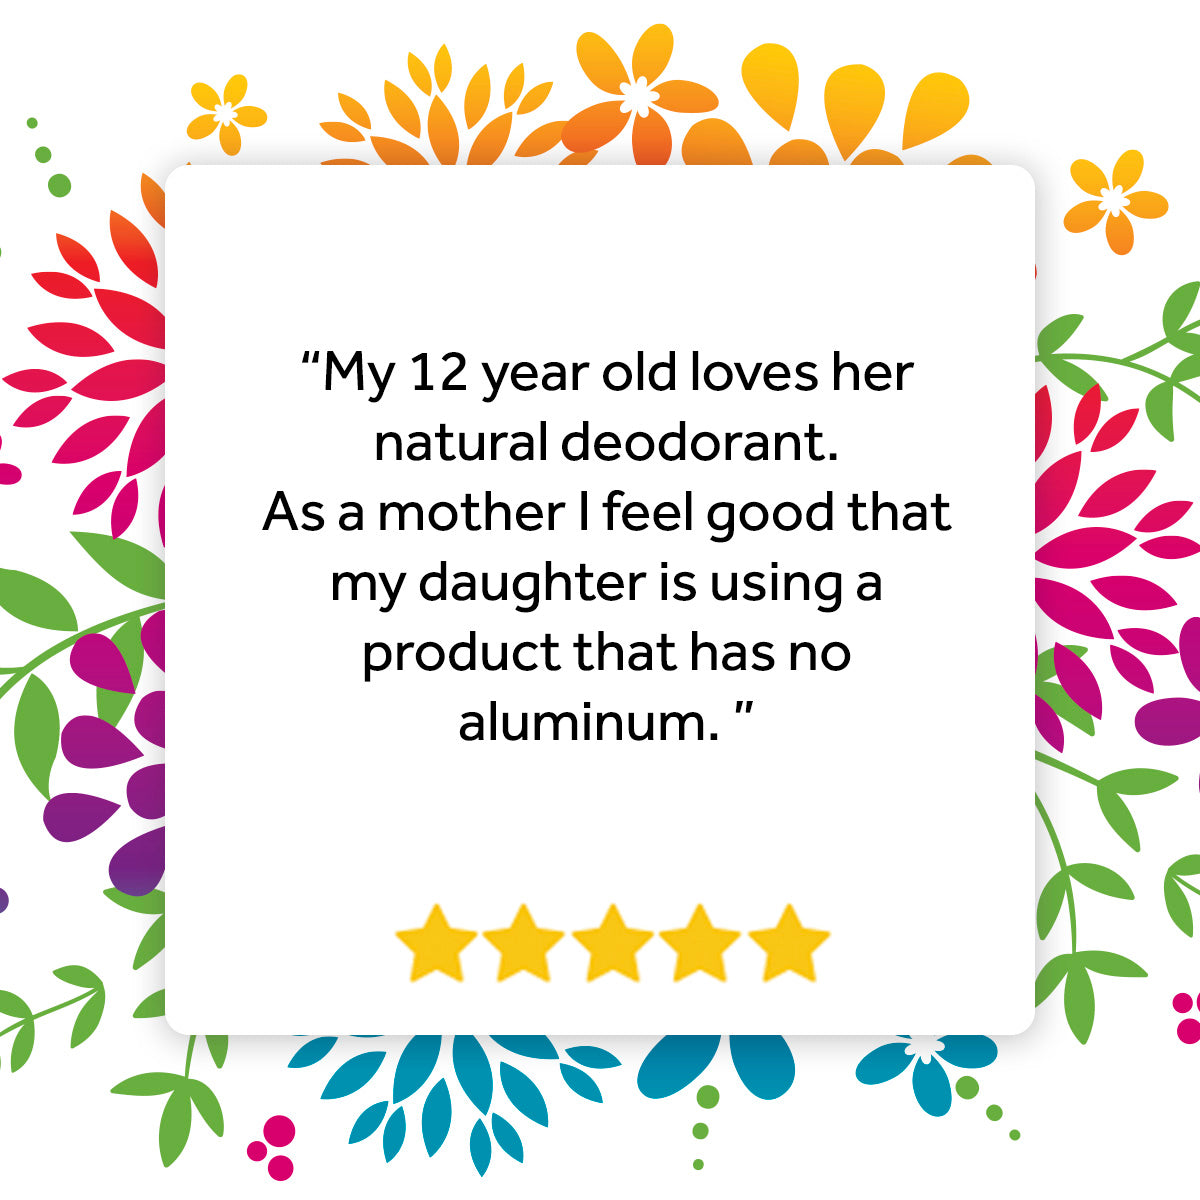 Testimonial Graphic: &quot;My 12 year old loves her natural deodorant. As a mother I feel good that my daughter is using a product that has no aluminum.&quot;